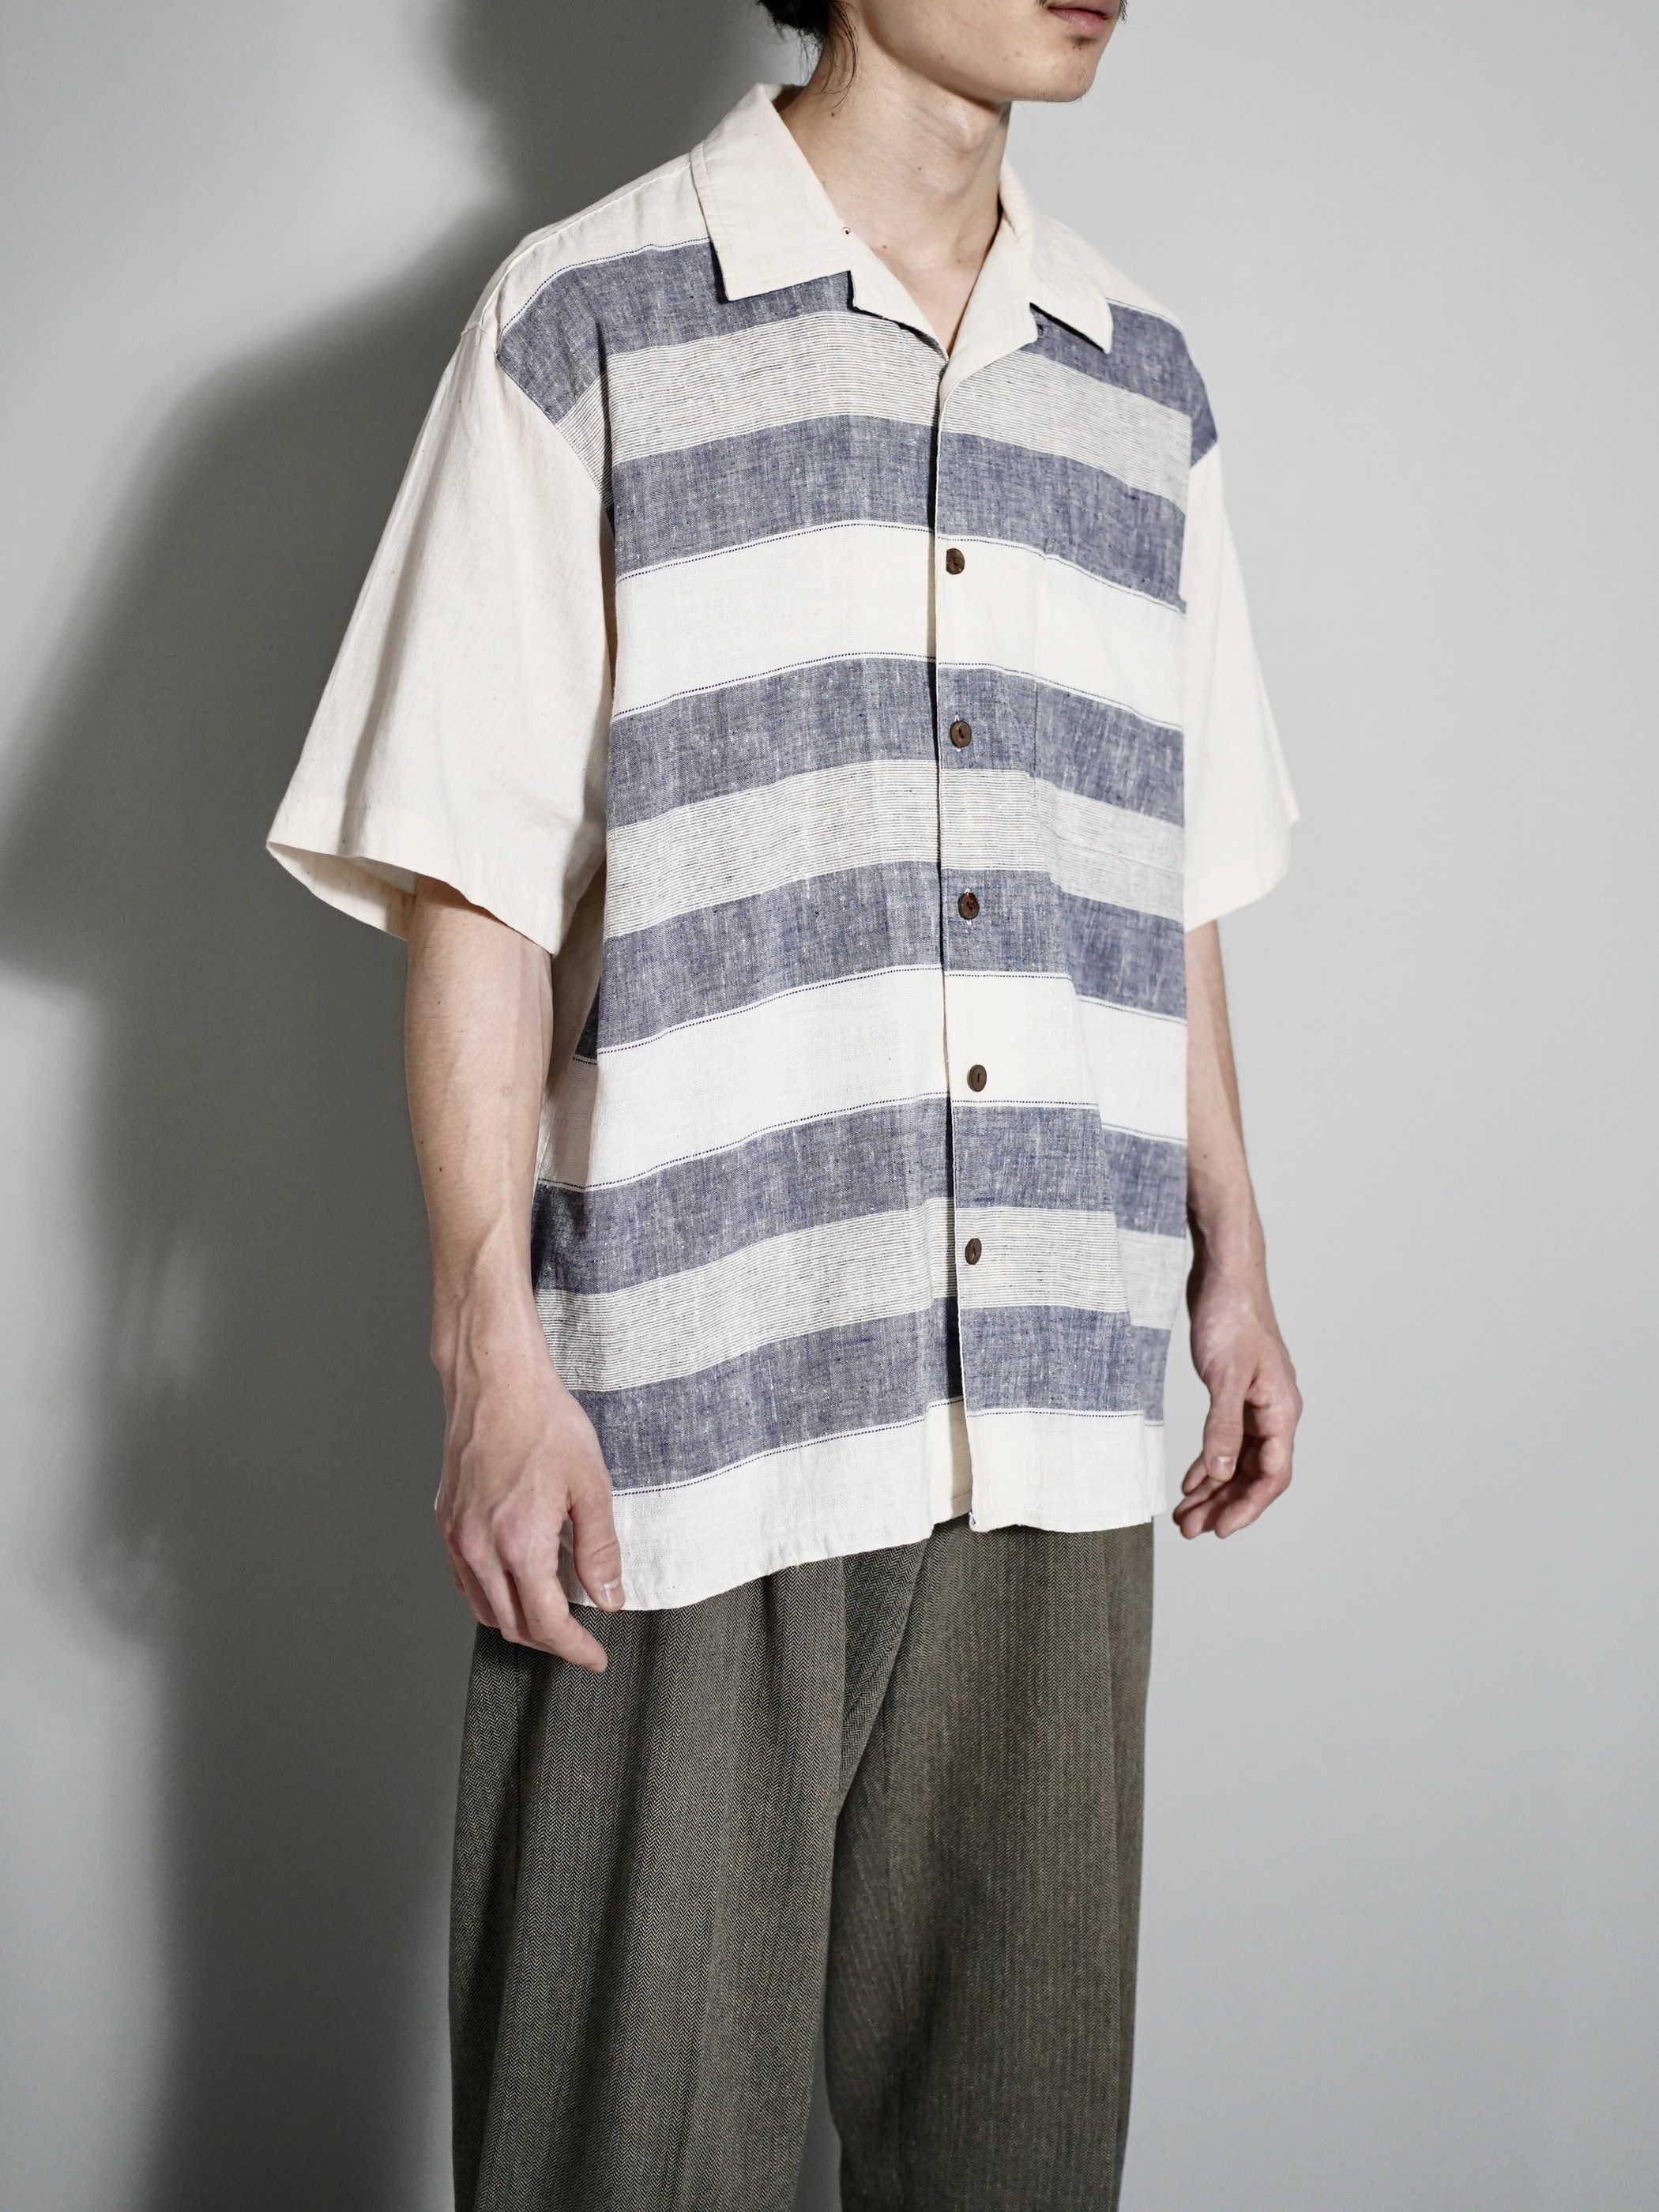 1990's C・I・T・Y STREETS Cotton×Linen Mulch border Loop-collar Shirts / Made in Hong Kong